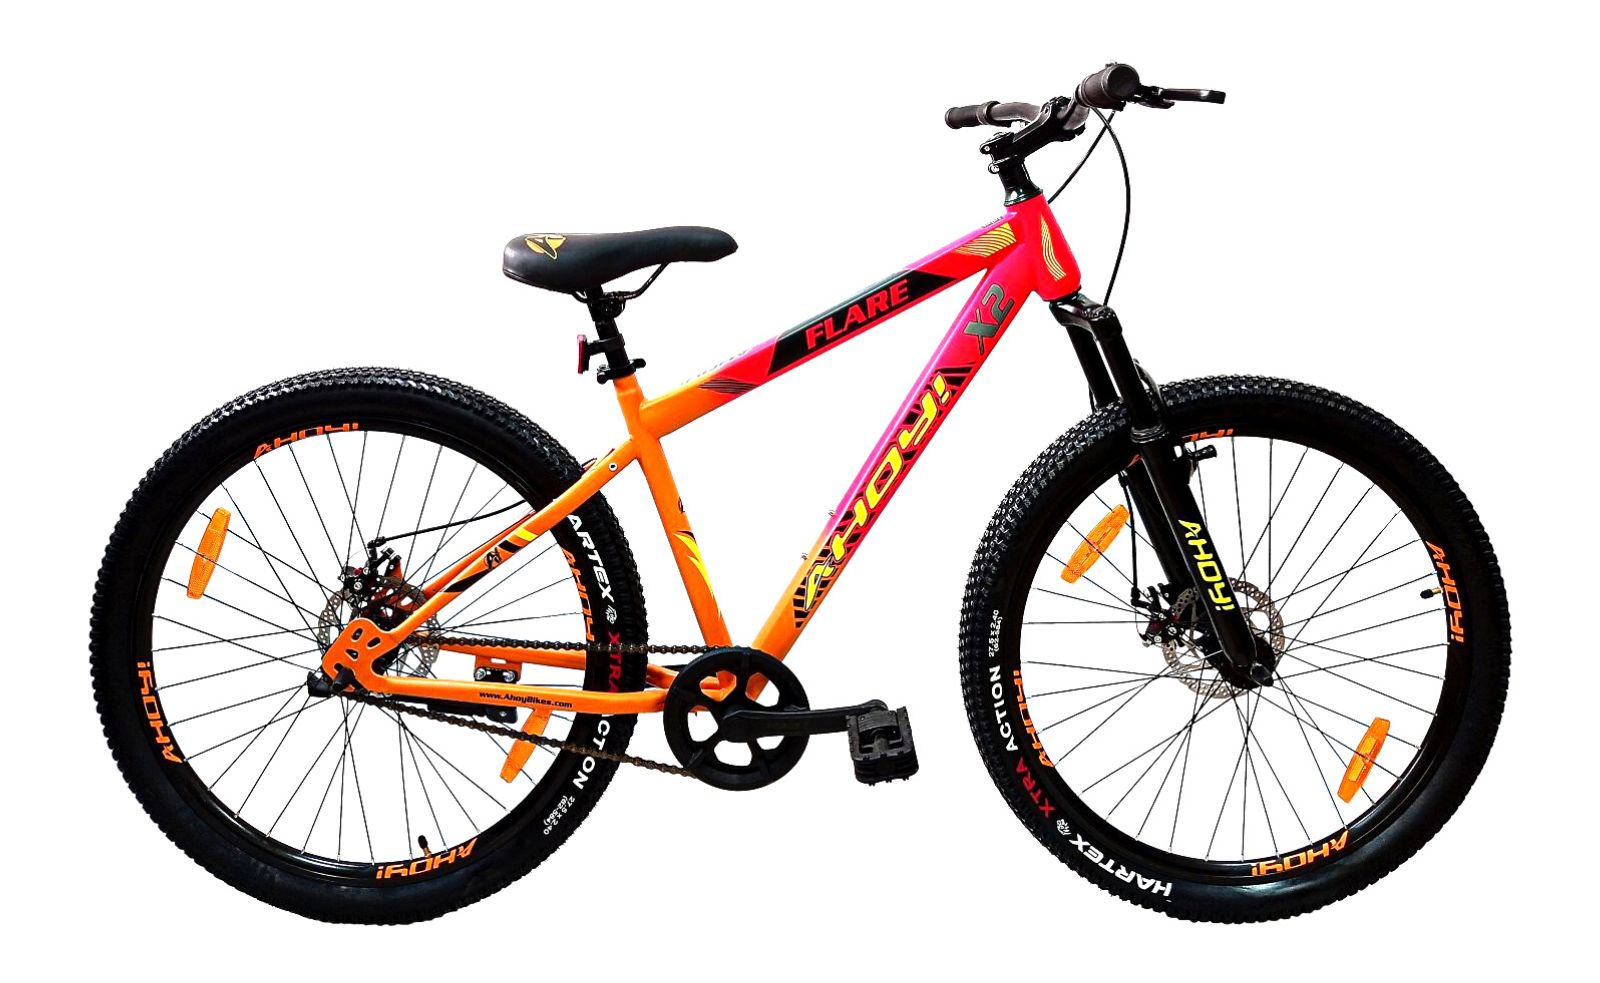 Flare Single Speed Cycle 27.5T | Buy Red Non Gear Bike for Men